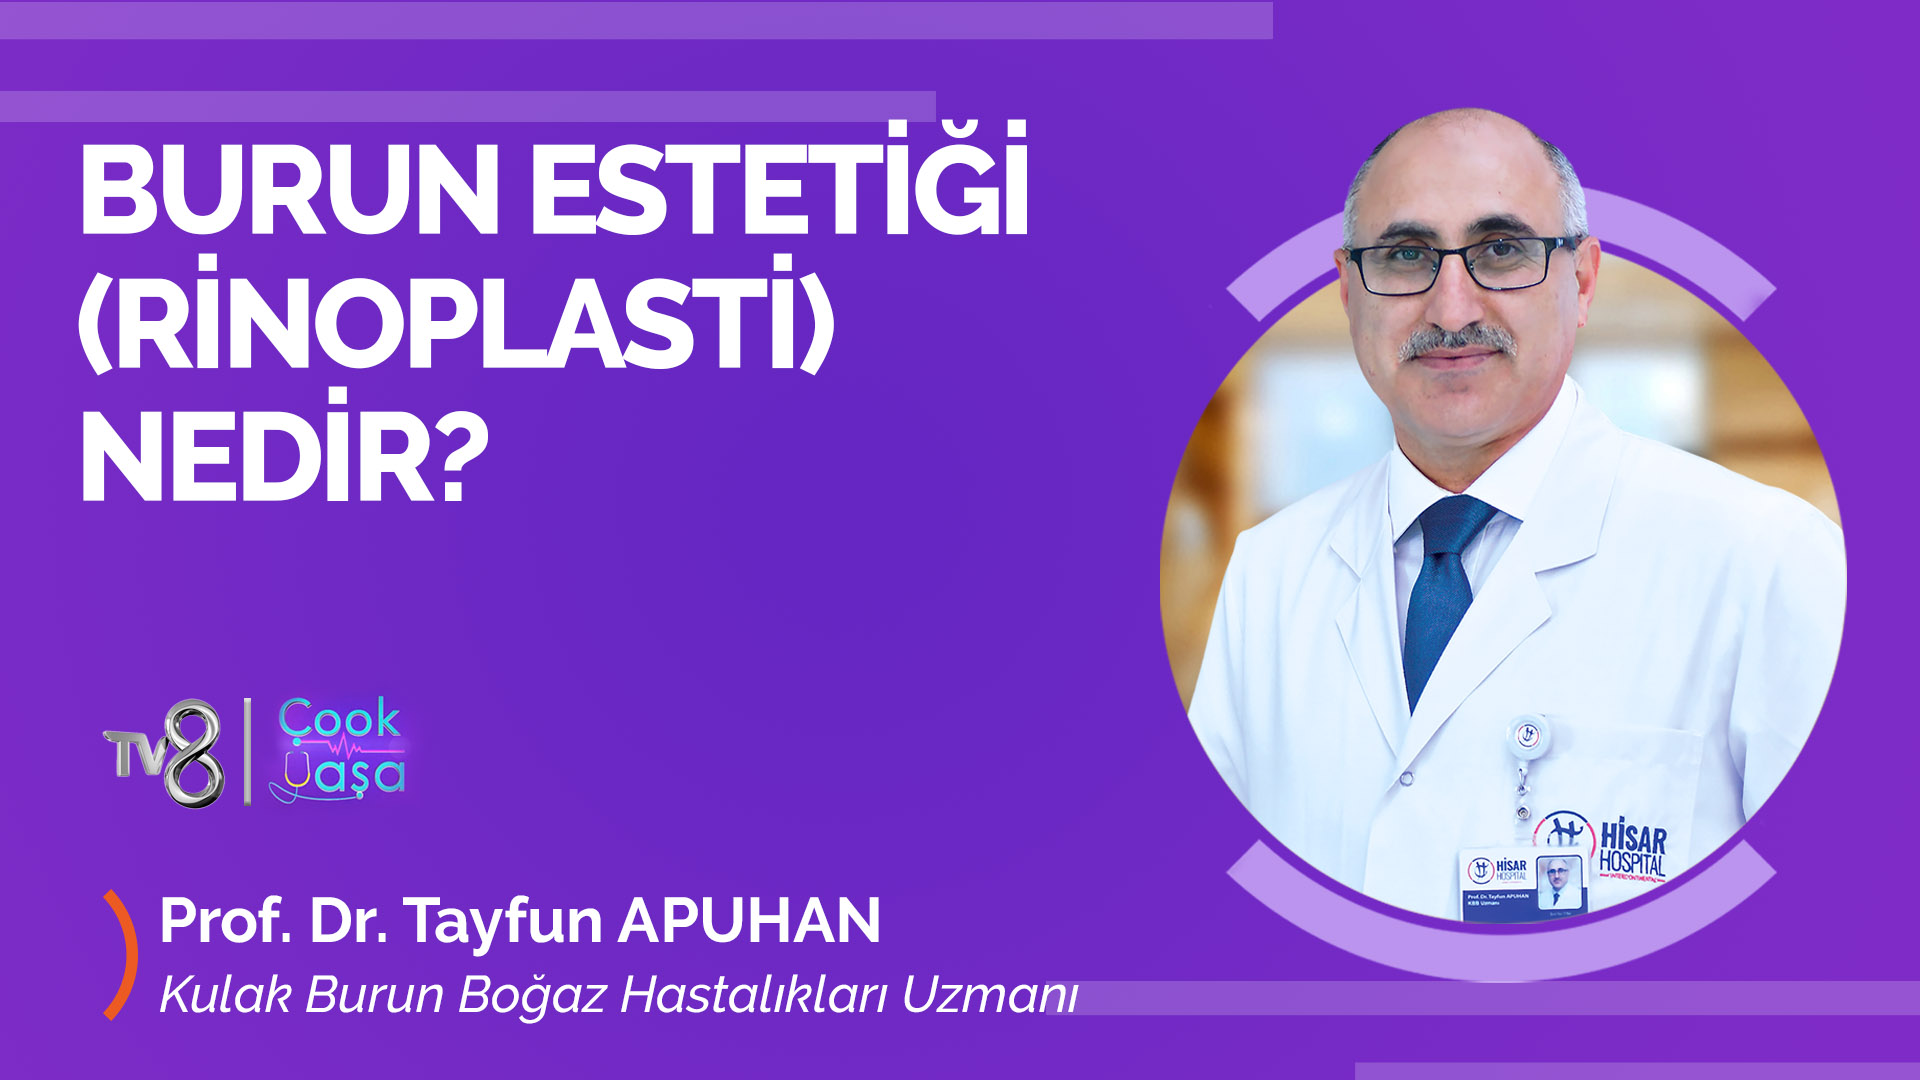 Prof Dr Tayfun Apuhan TV8 Cover Youtube copy 1